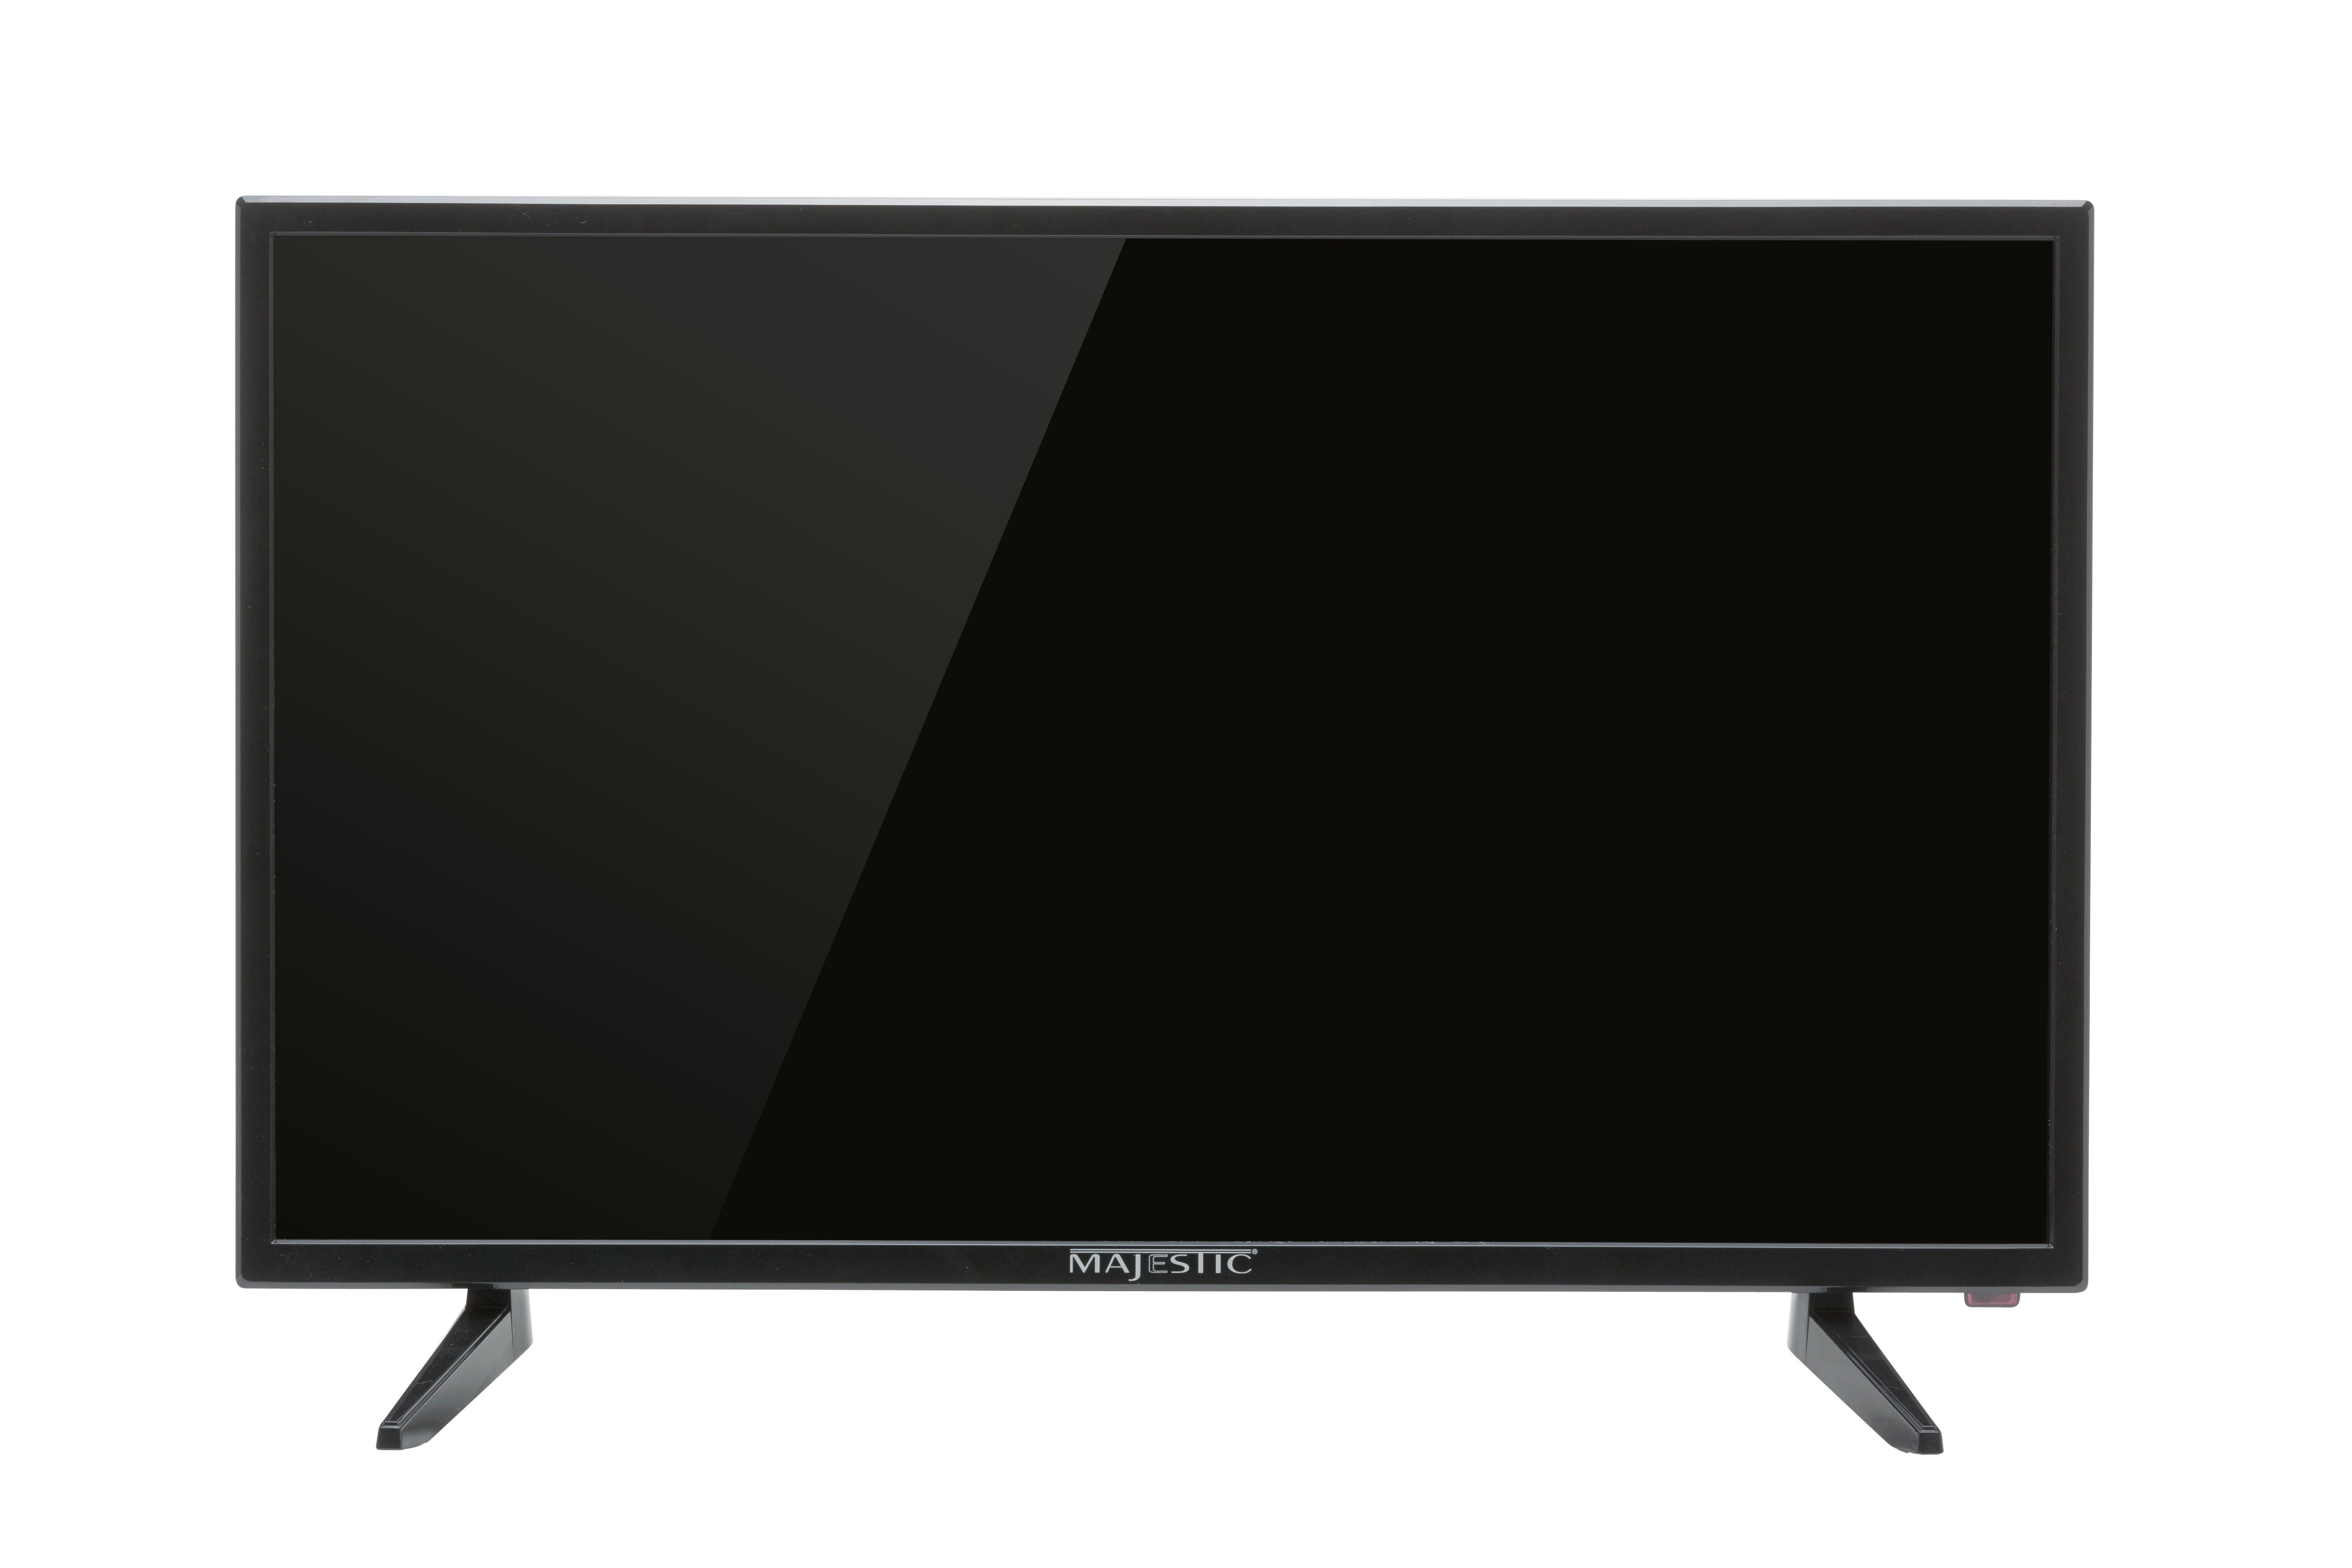 Majestic Launches New 12 Volt 32-Inch LED TV for Marine and RV Industry Packed With Features